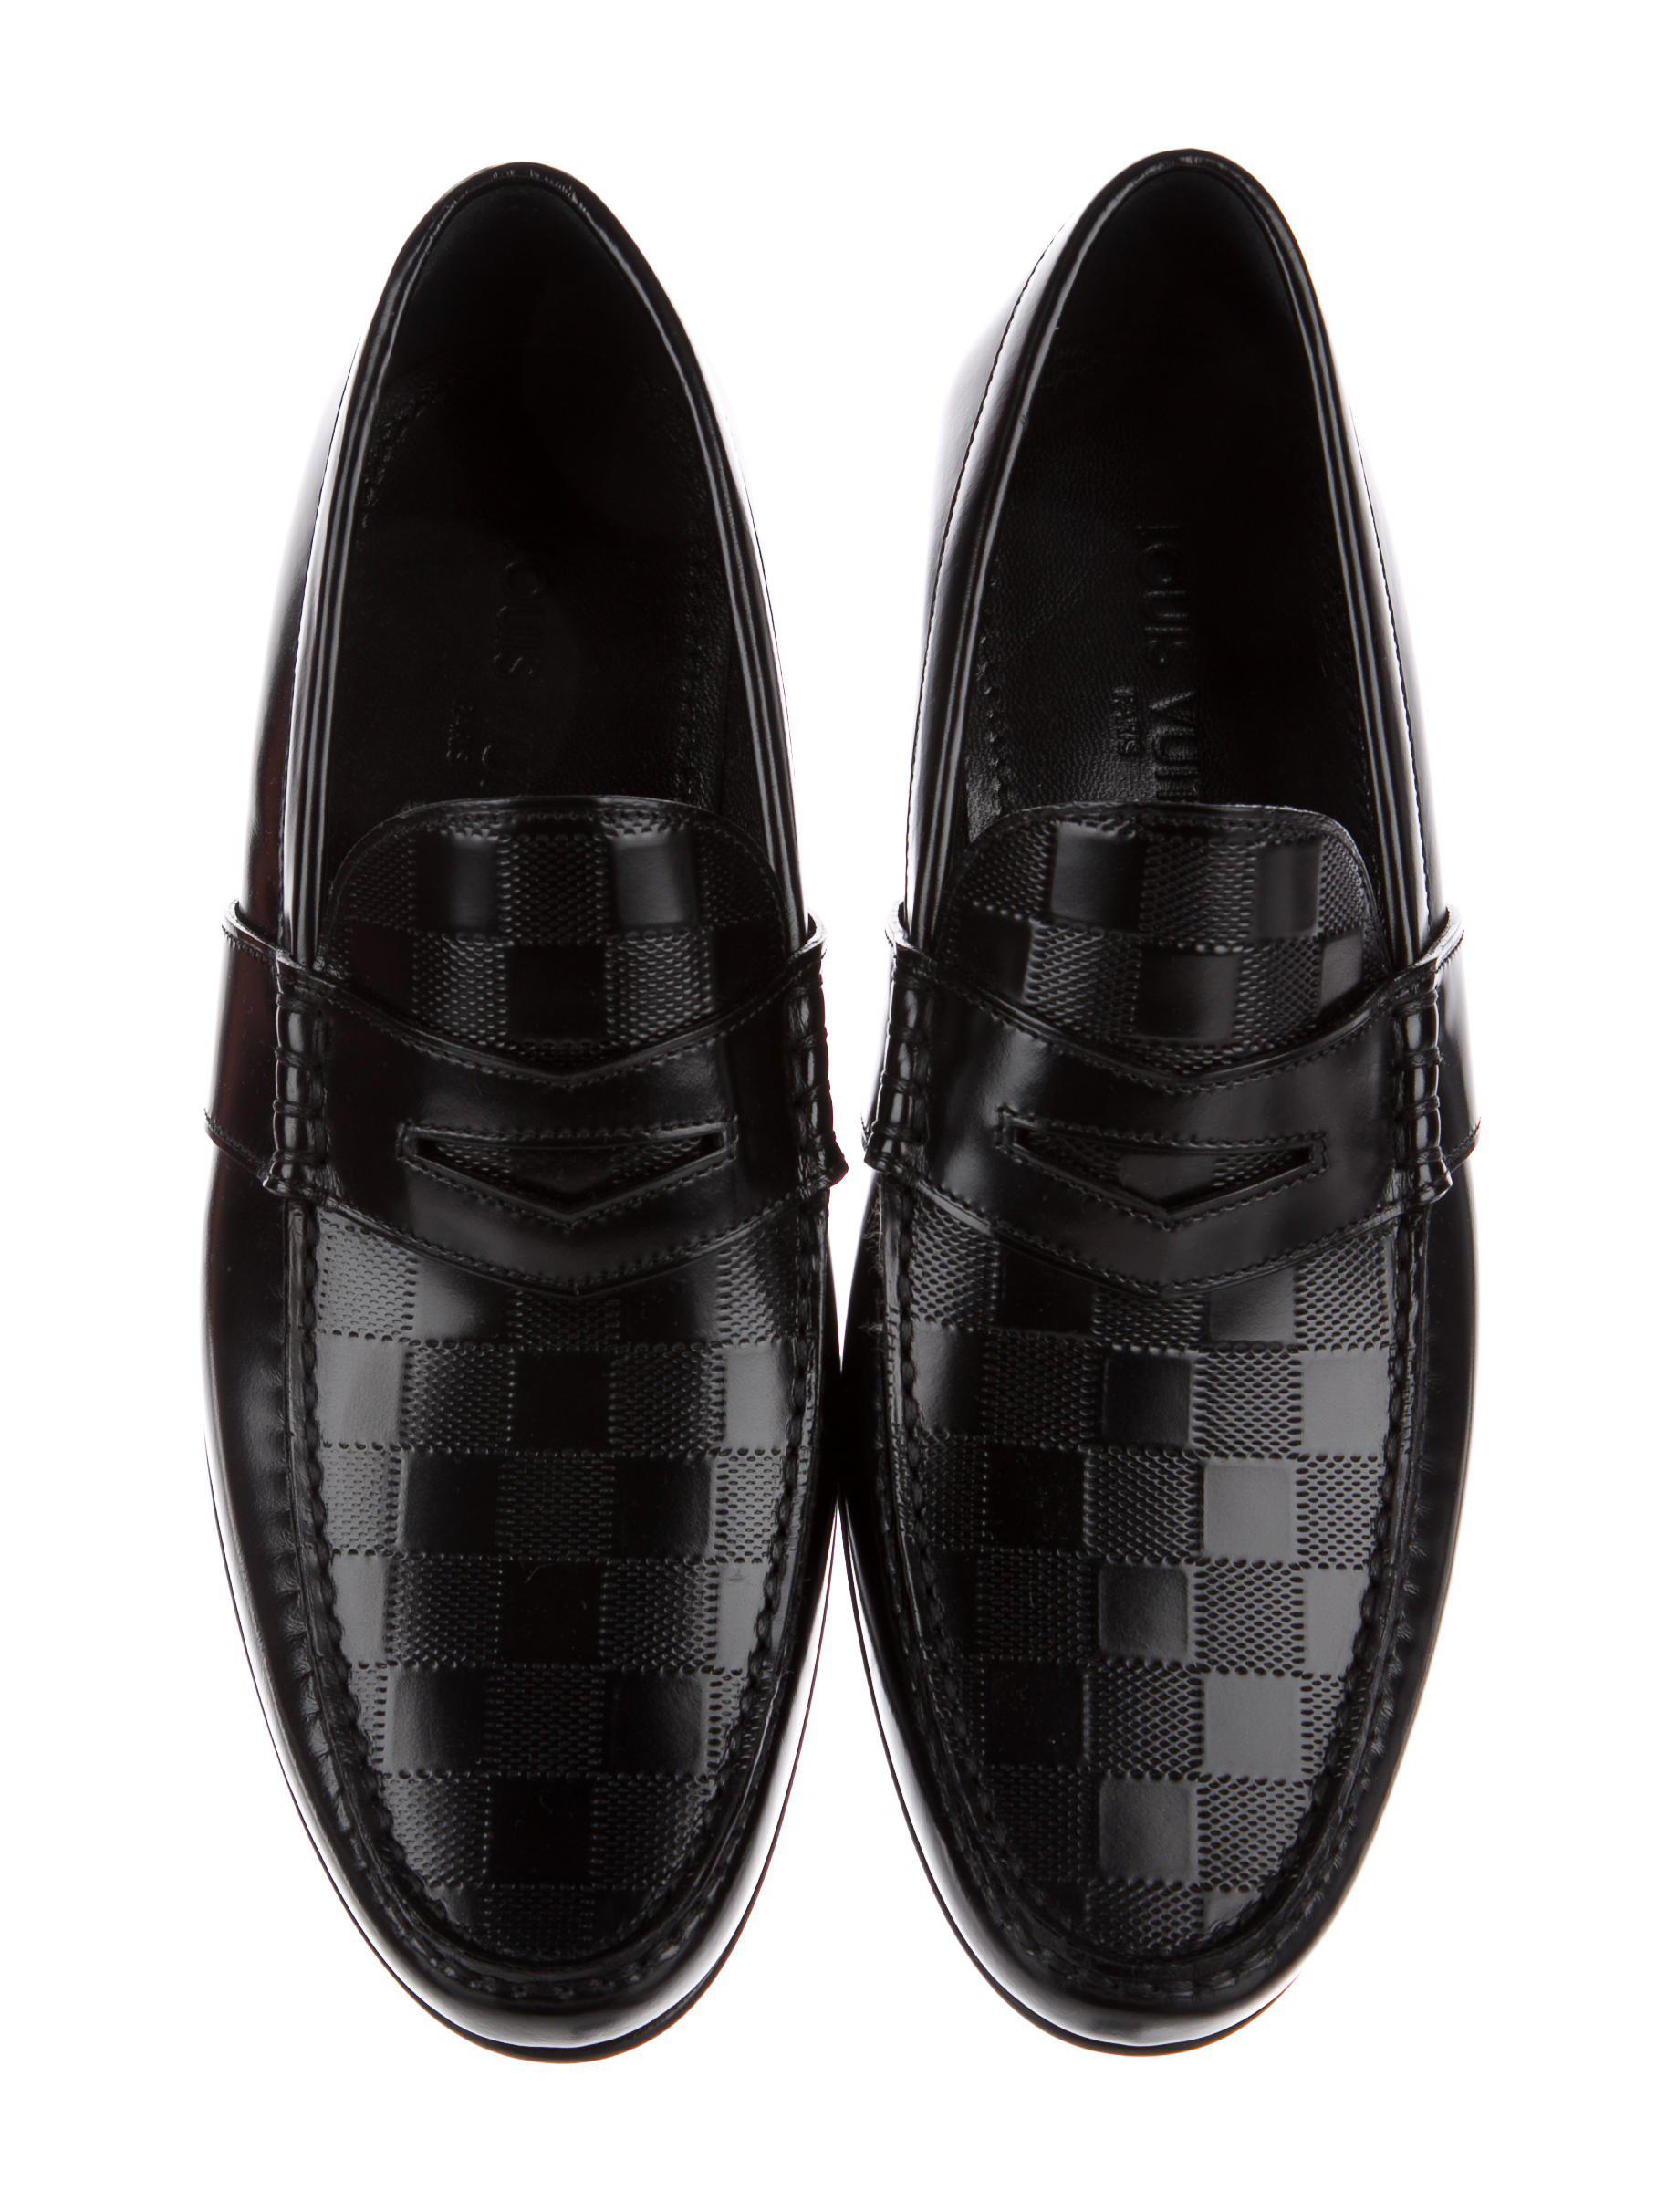 Lyst - Louis Vuitton Damier Penny Loafers W/ Tags in Black for Men